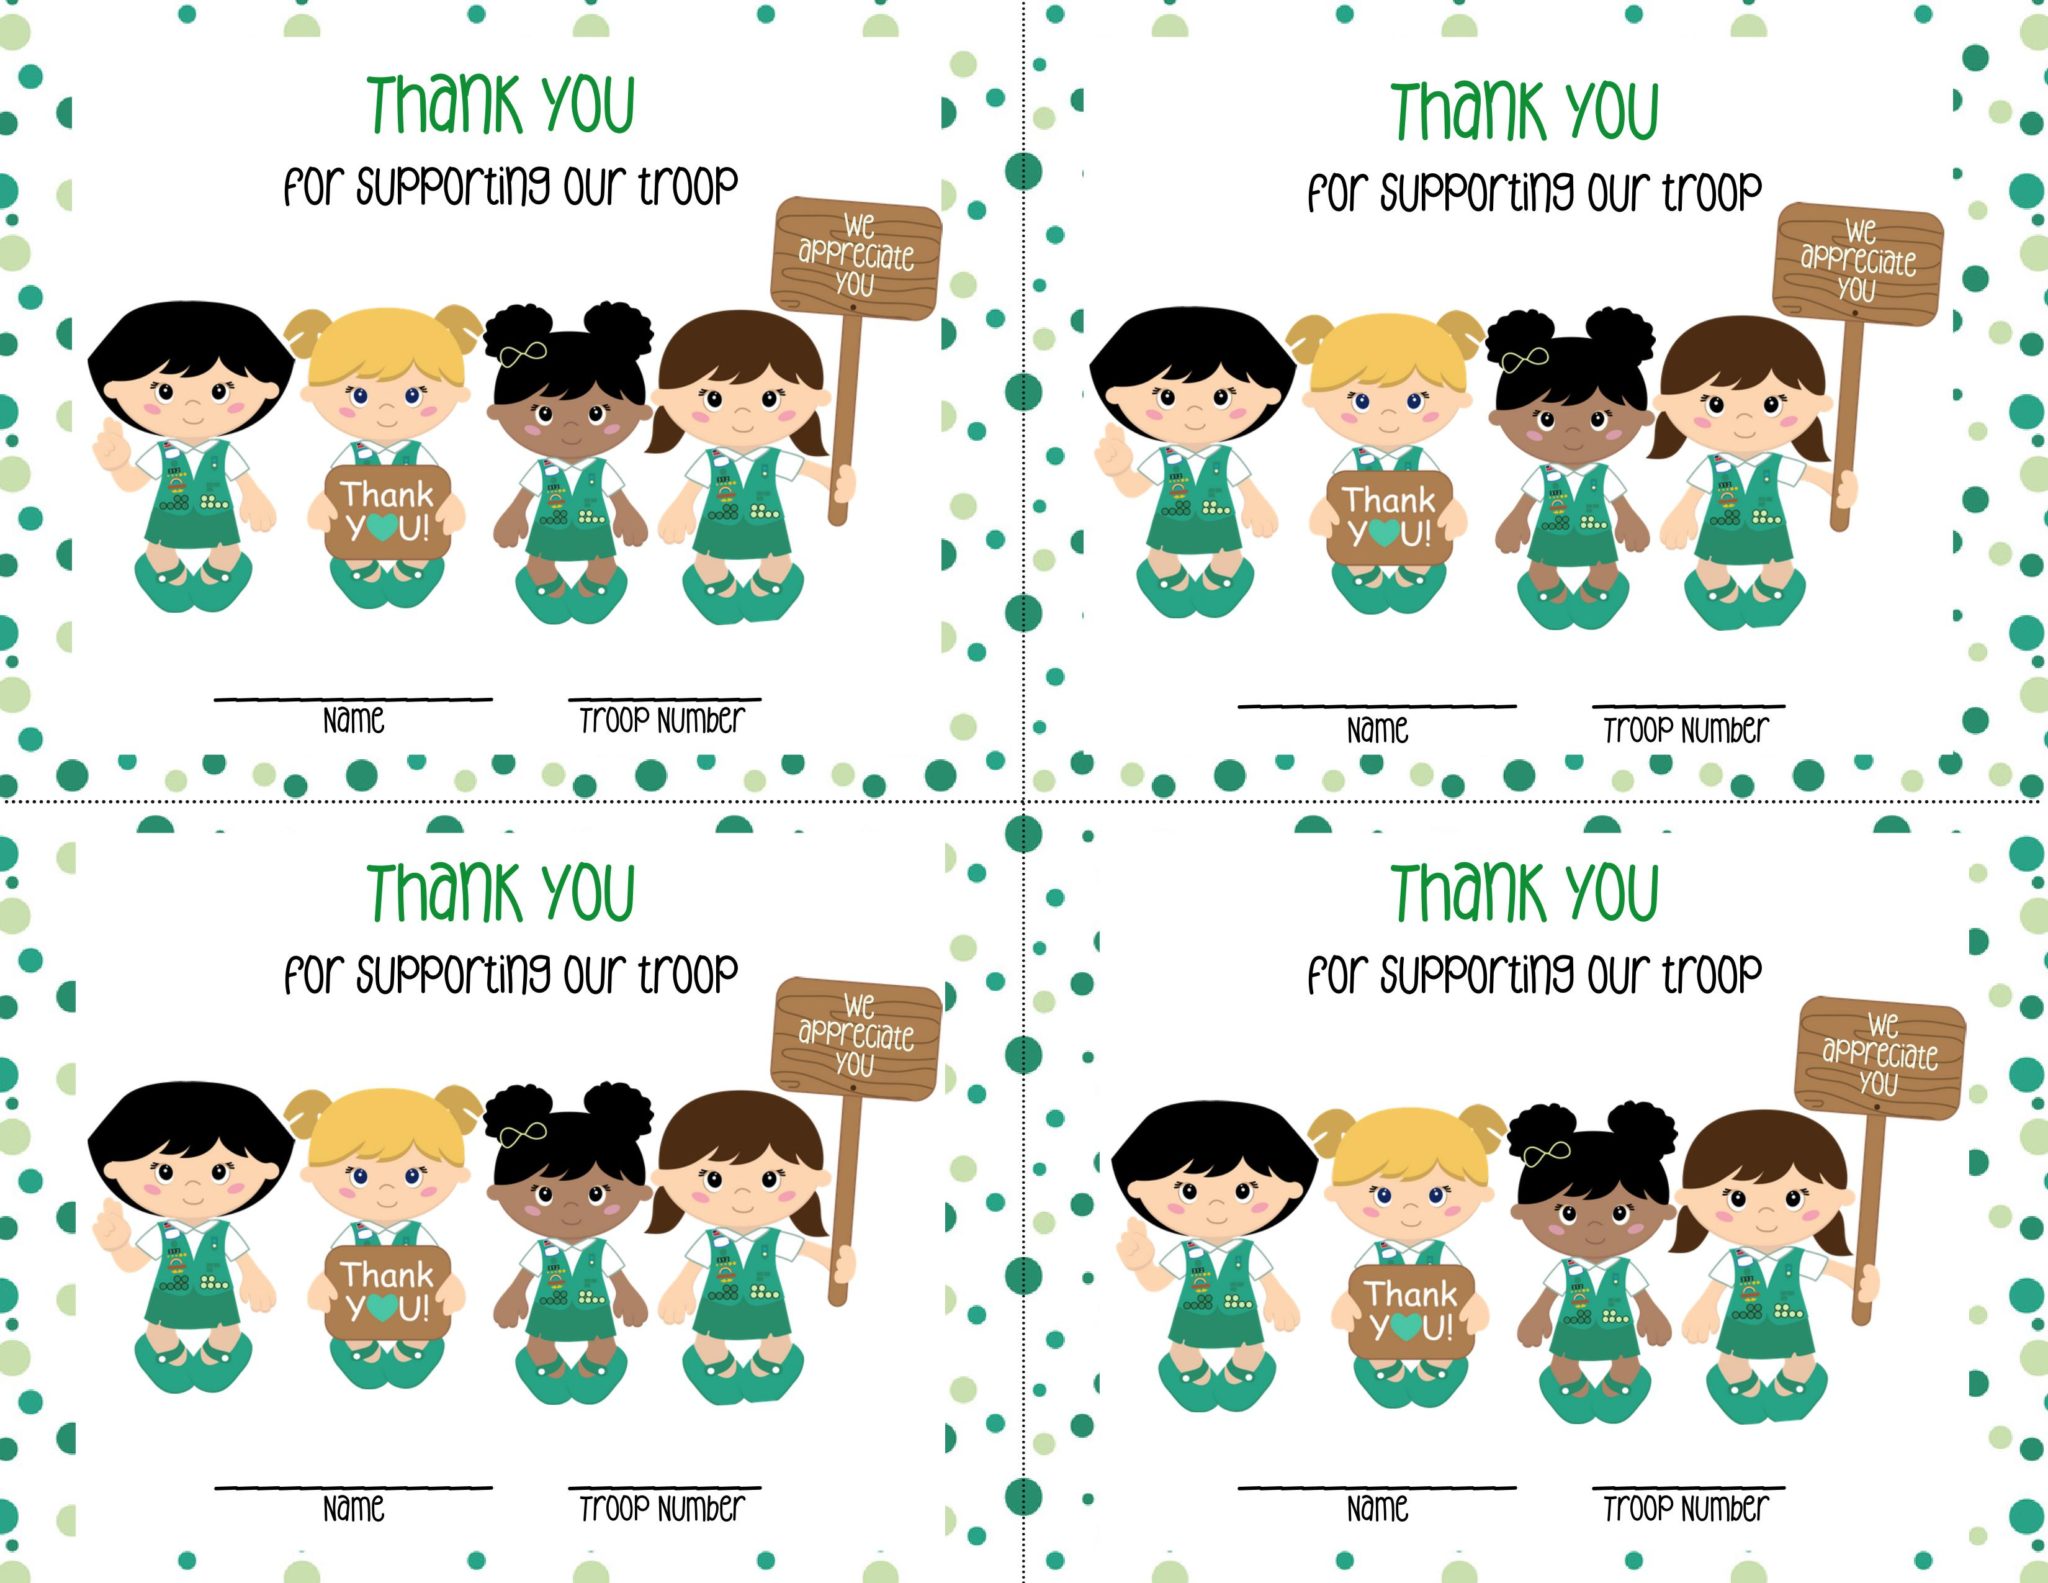 girl-scout-cookies-thank-you-cards-1-1-clementine-county